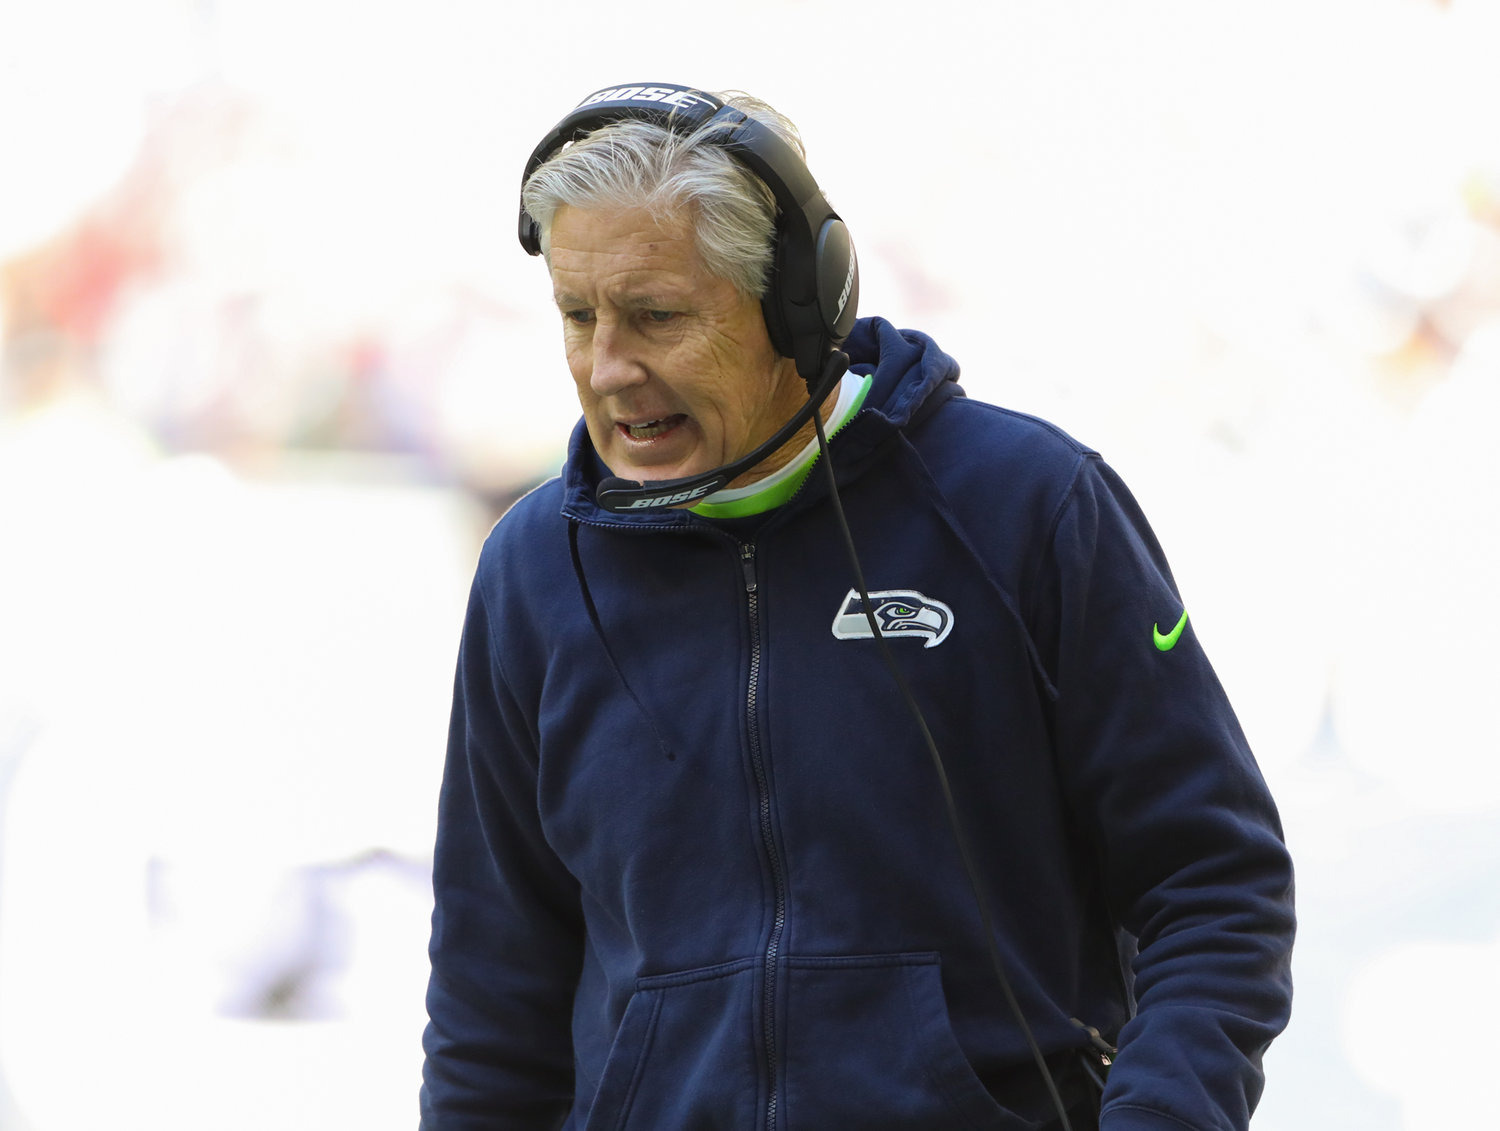 Seattle Seahawks head coach Pete Carroll during the second half of an NFL game between the Seahawks and the Texans on December 12, 2021 in Houston, Texas.